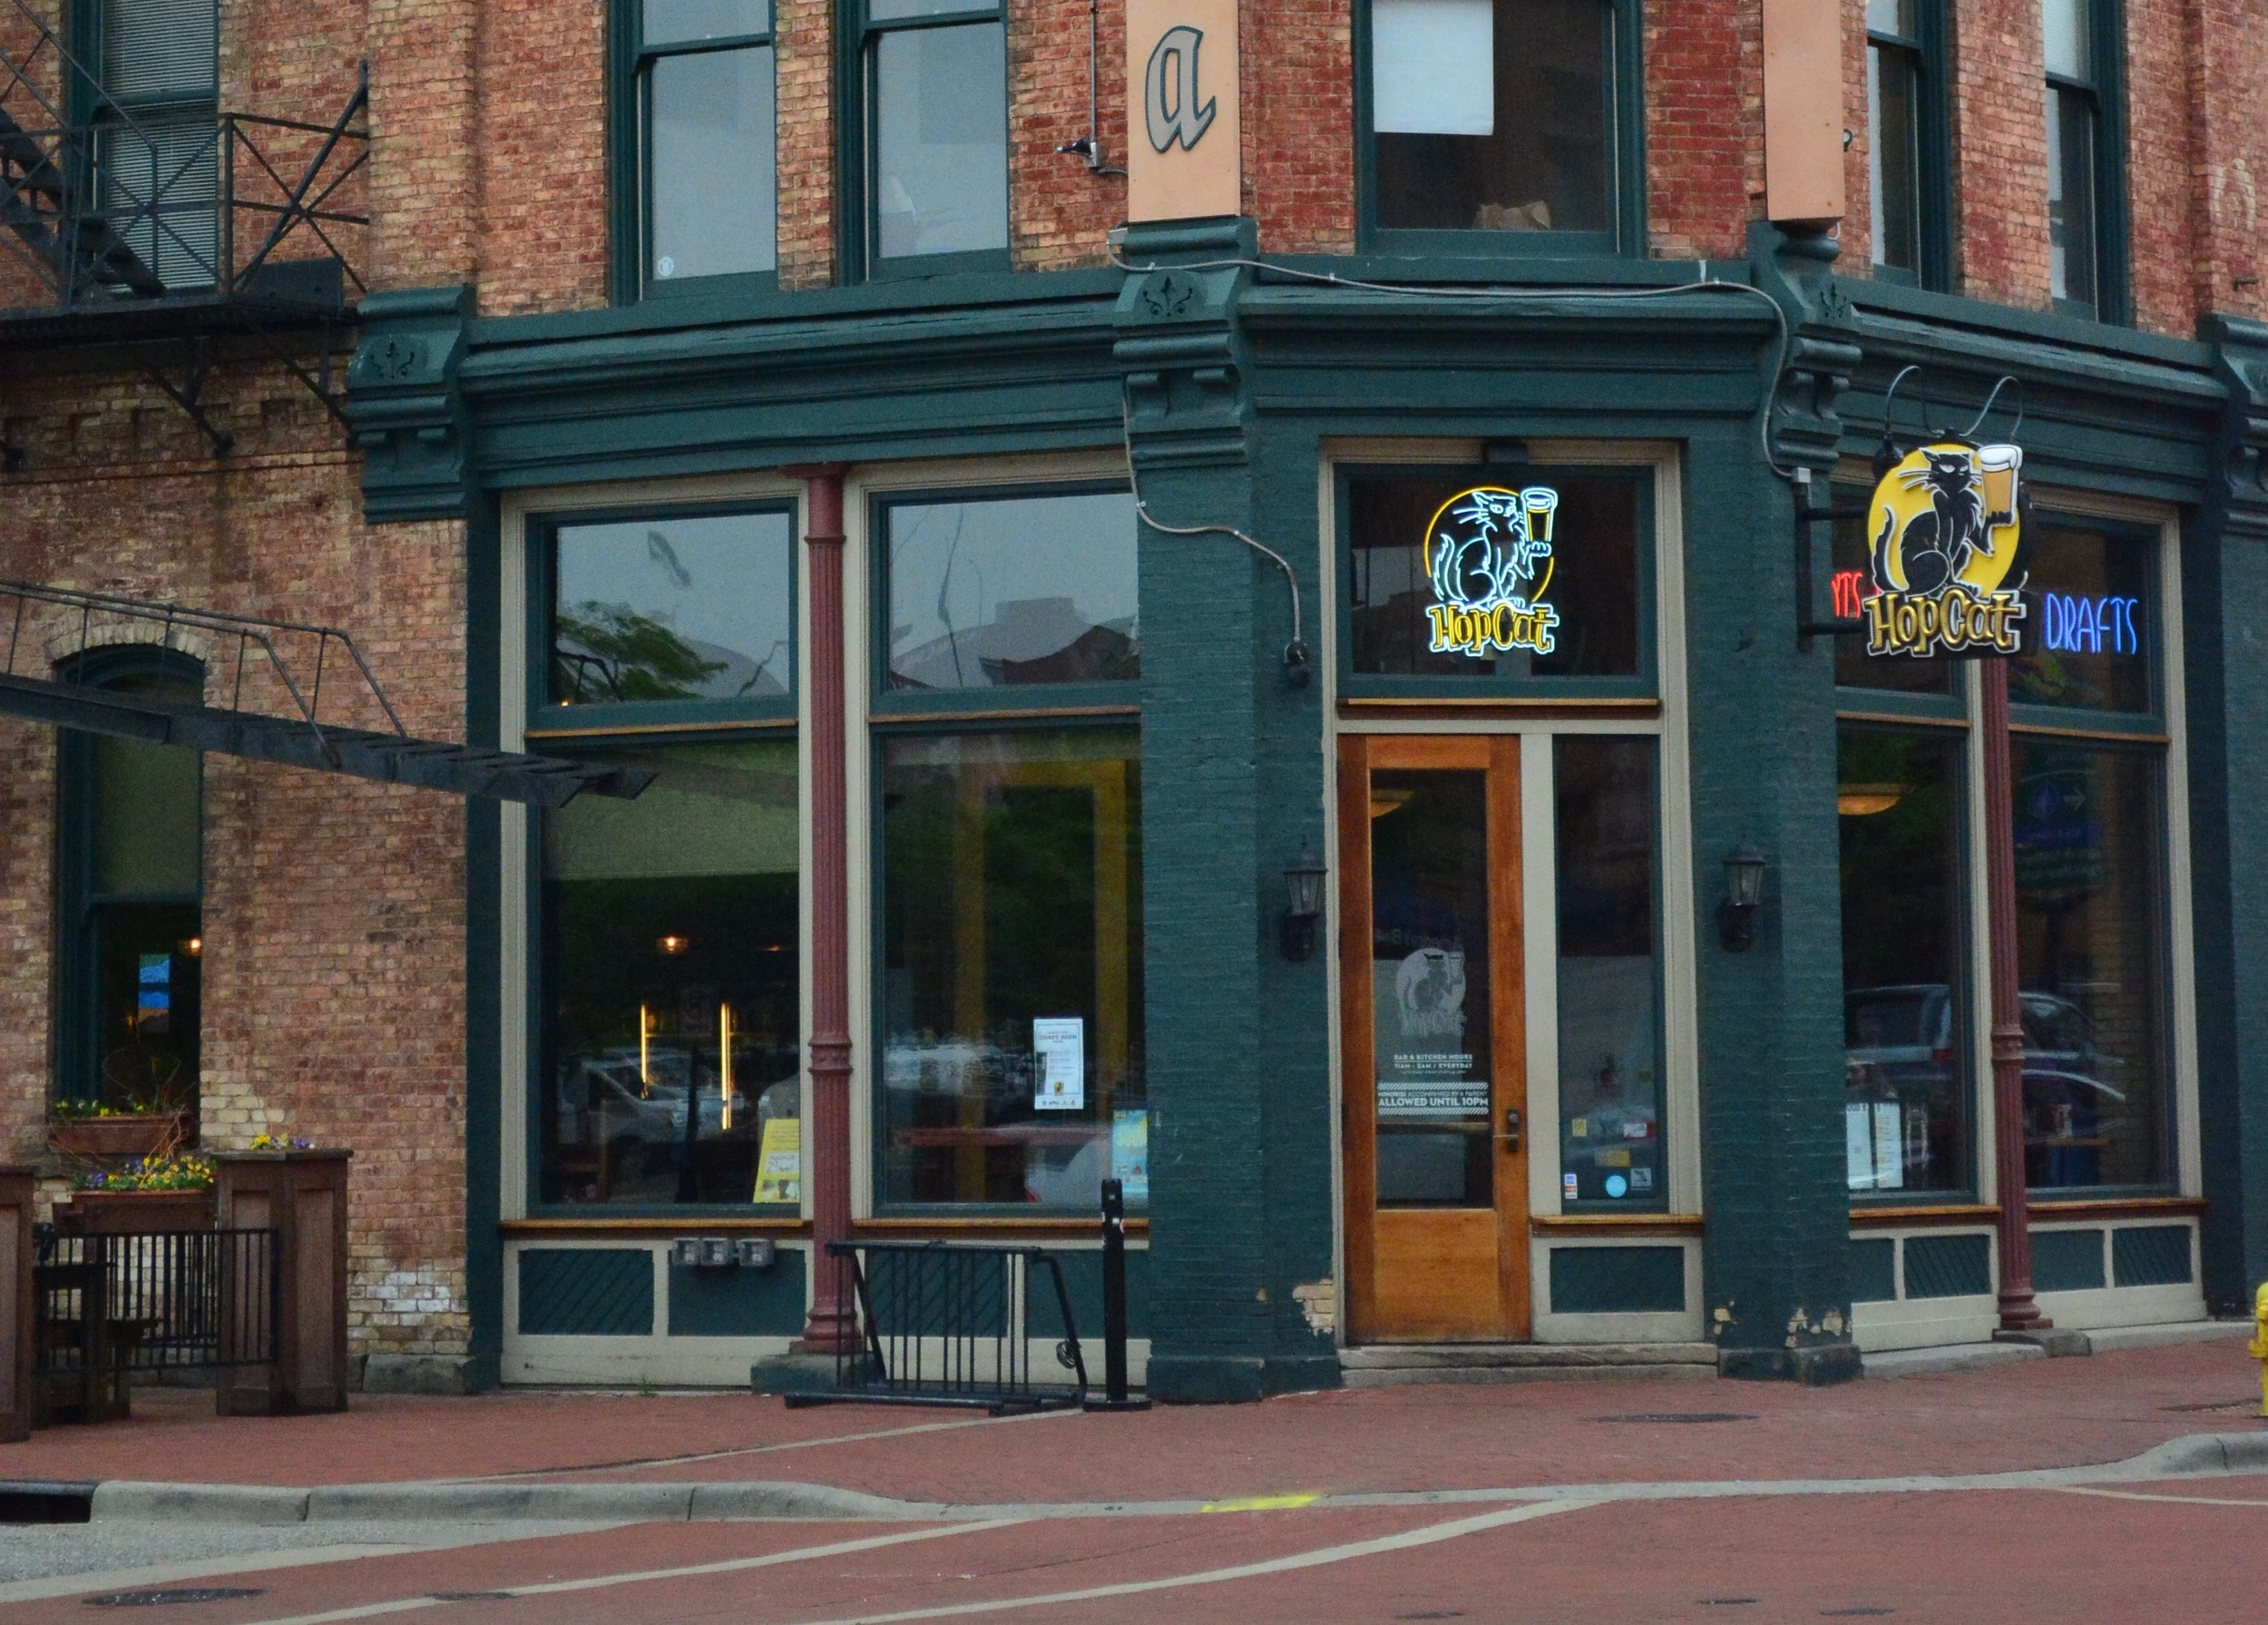 where to park for hopcat grand rapids